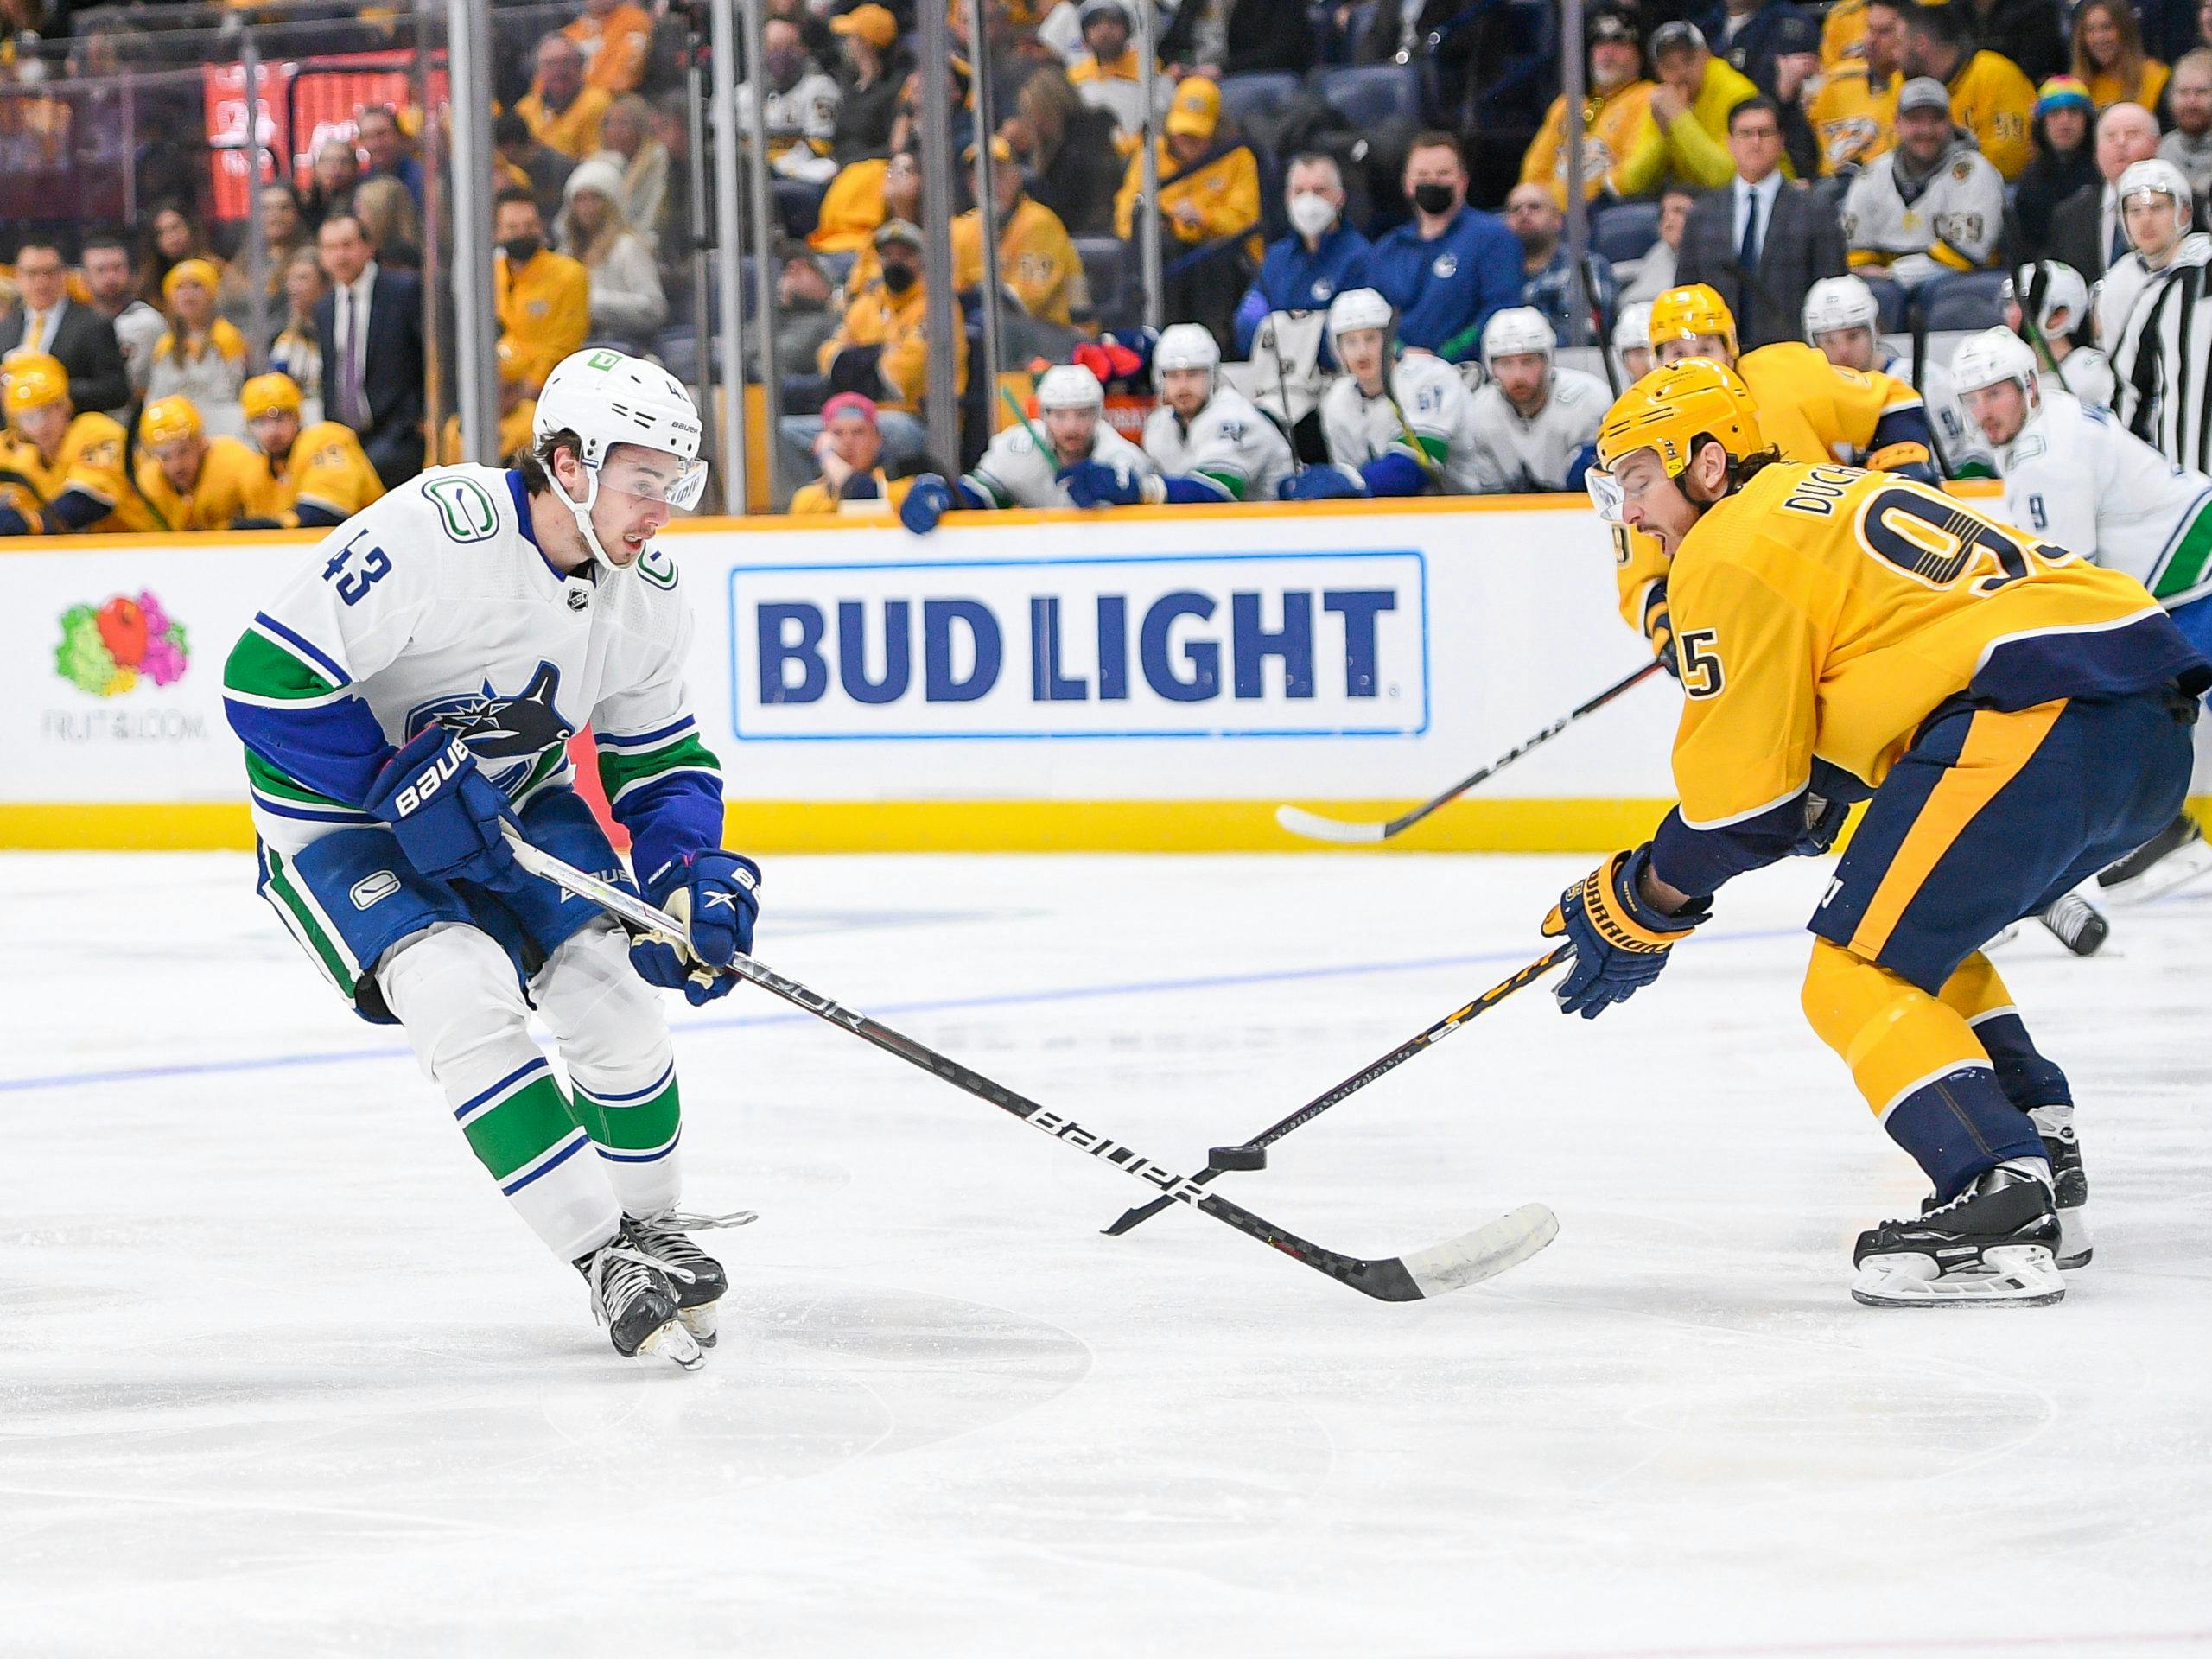 Canucks re-sign Bo Horvat to 6-year, $33 million deal 